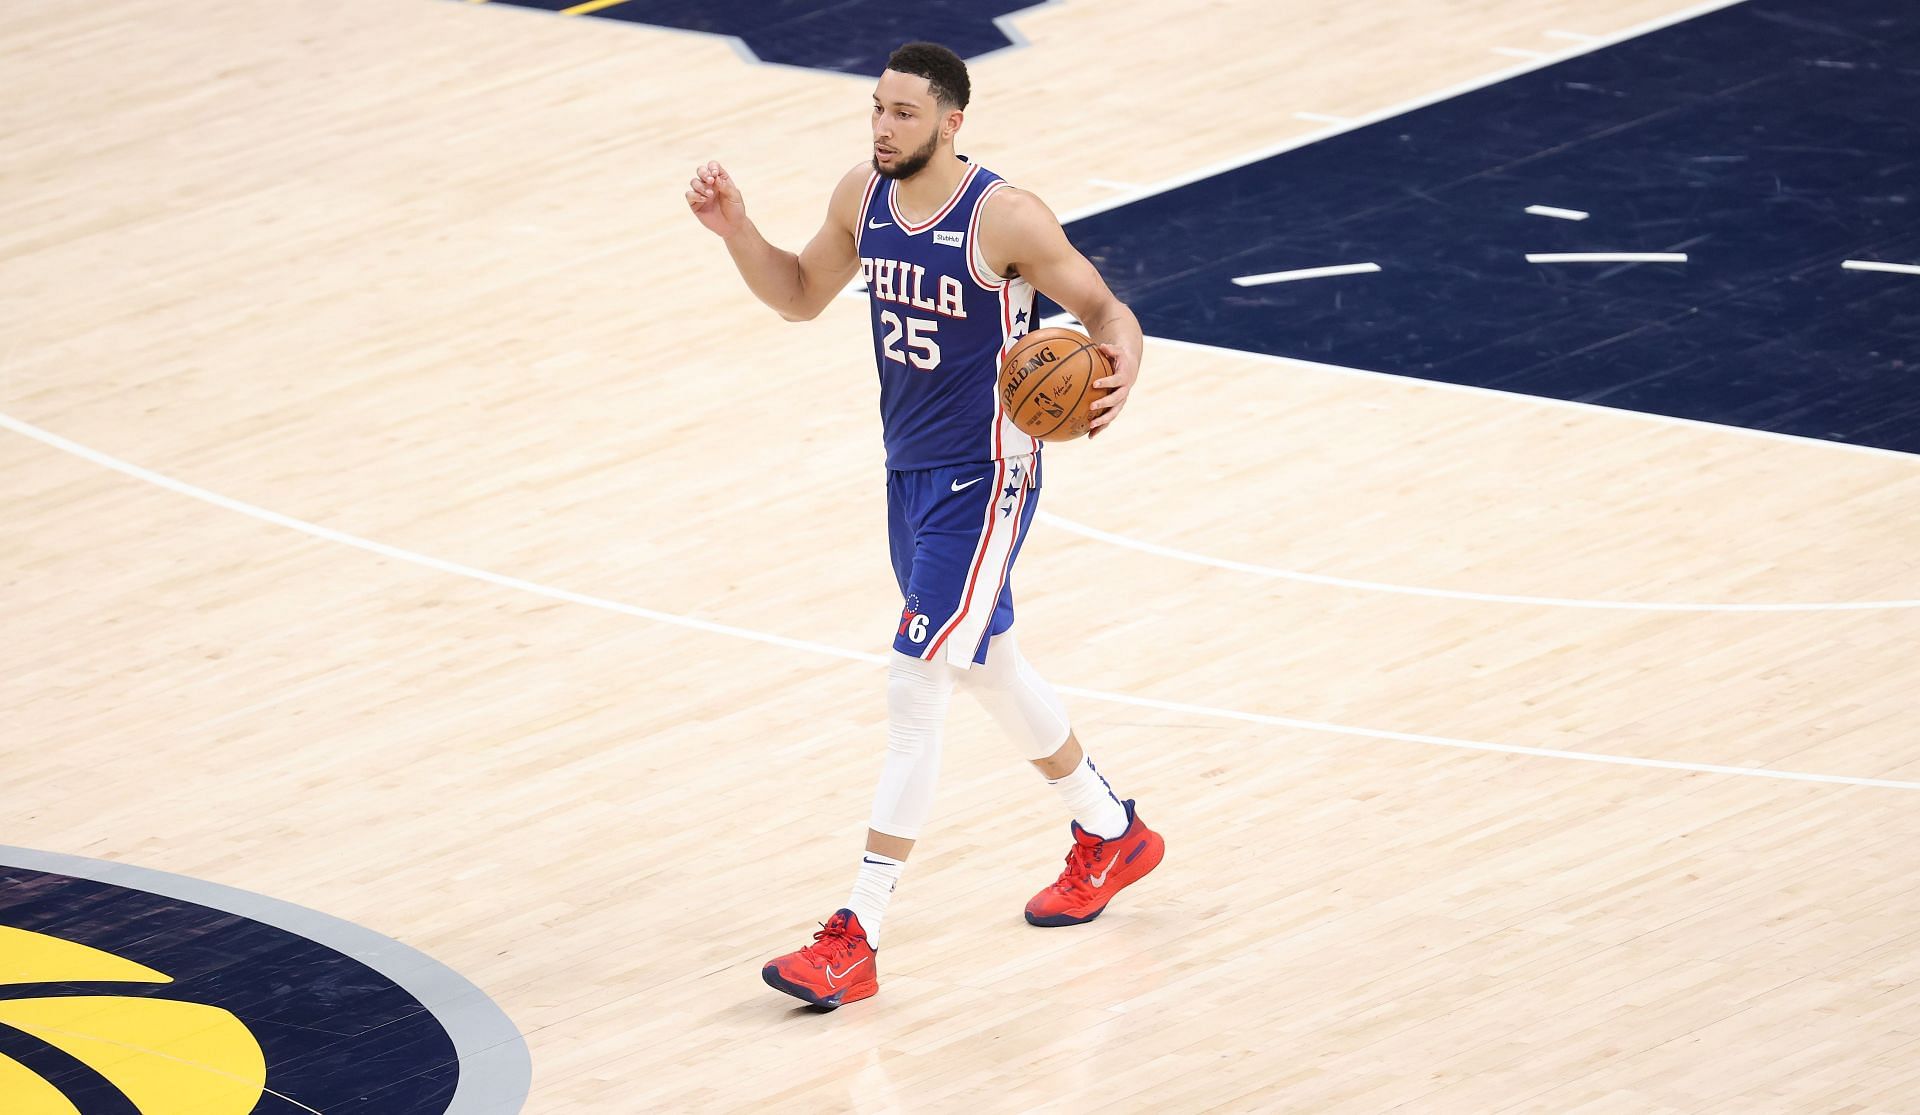 Philadelphia 76ers star Ben Simmons is sidelined for an indefinite period